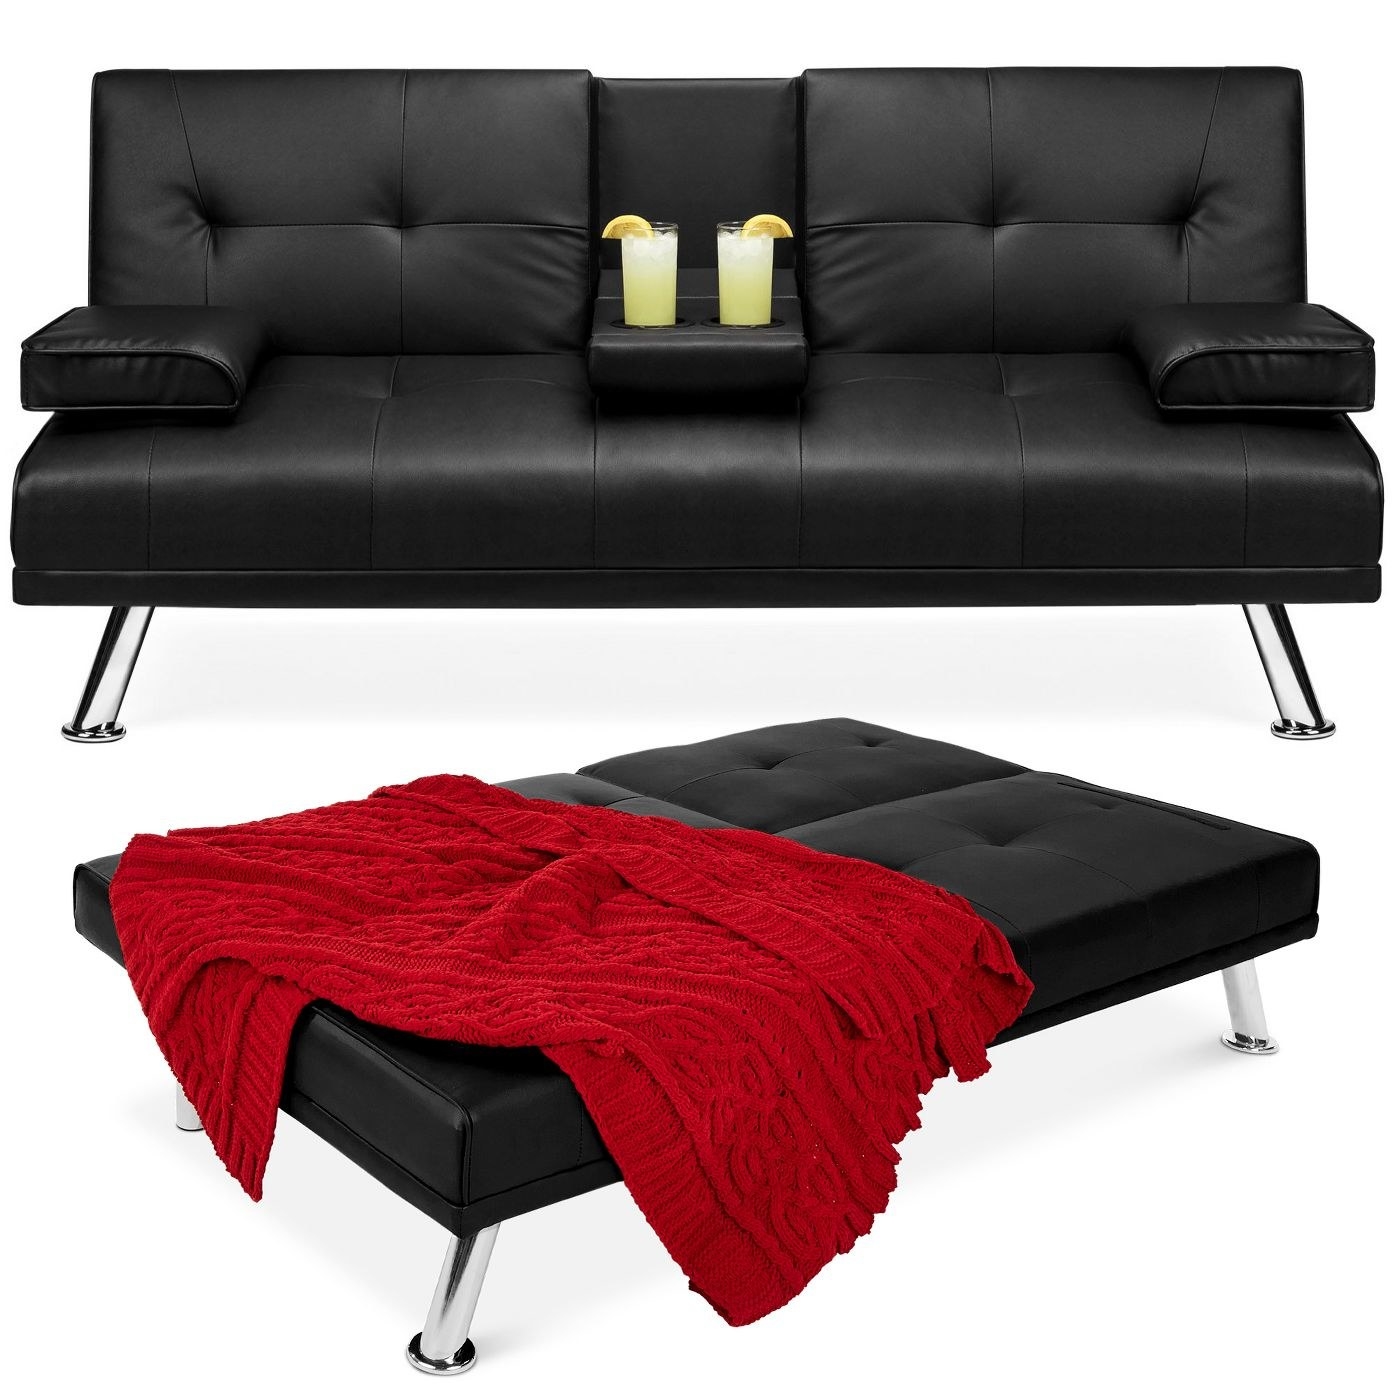 The convertible sofa in sofa and bed configurations